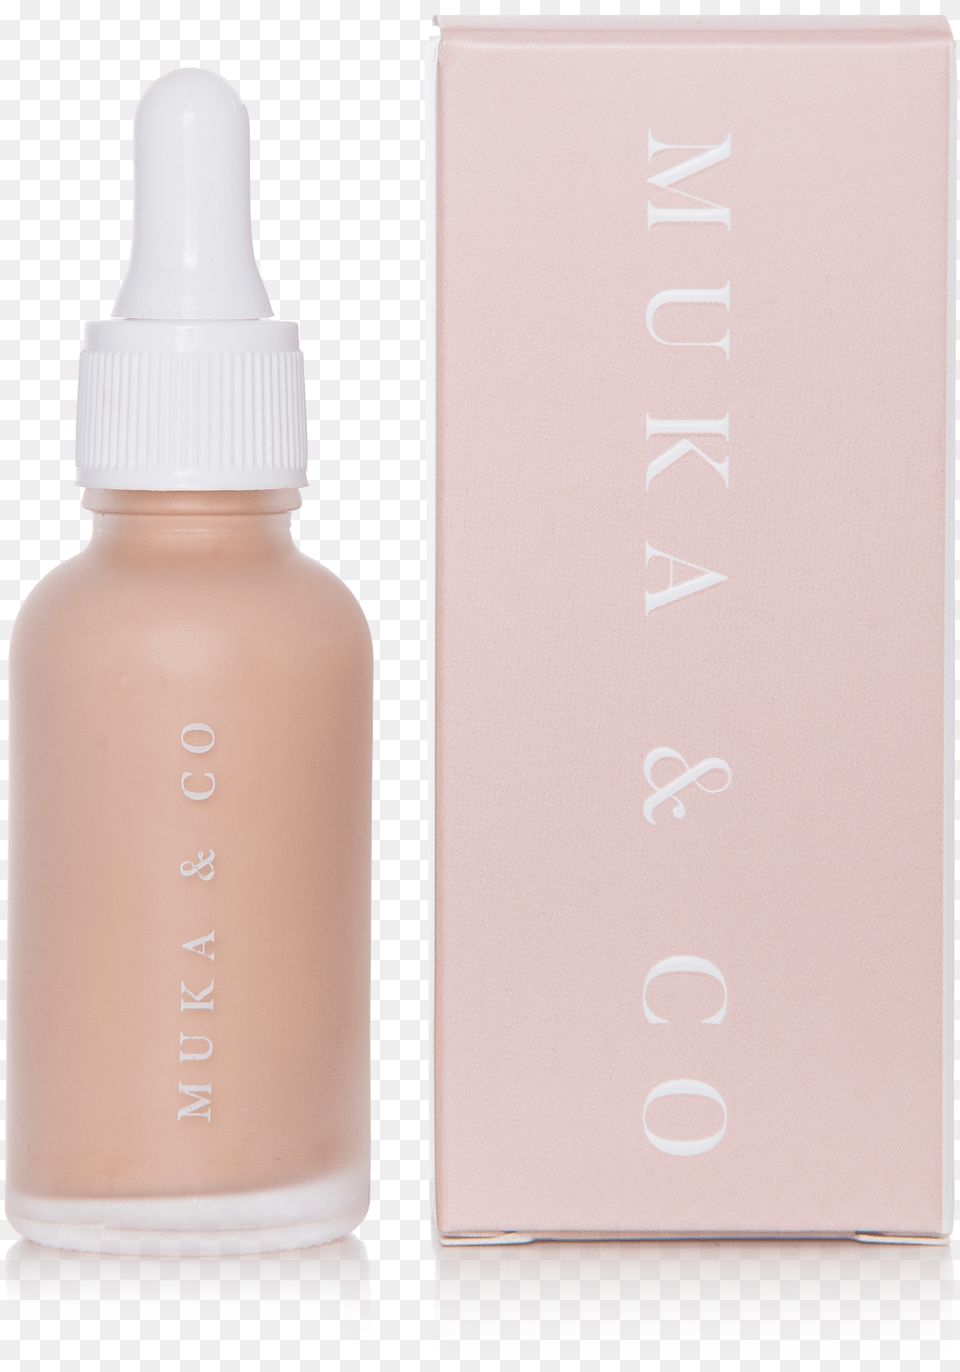 Blush Baby Bottle, Lotion, Book, Publication, Cosmetics Png